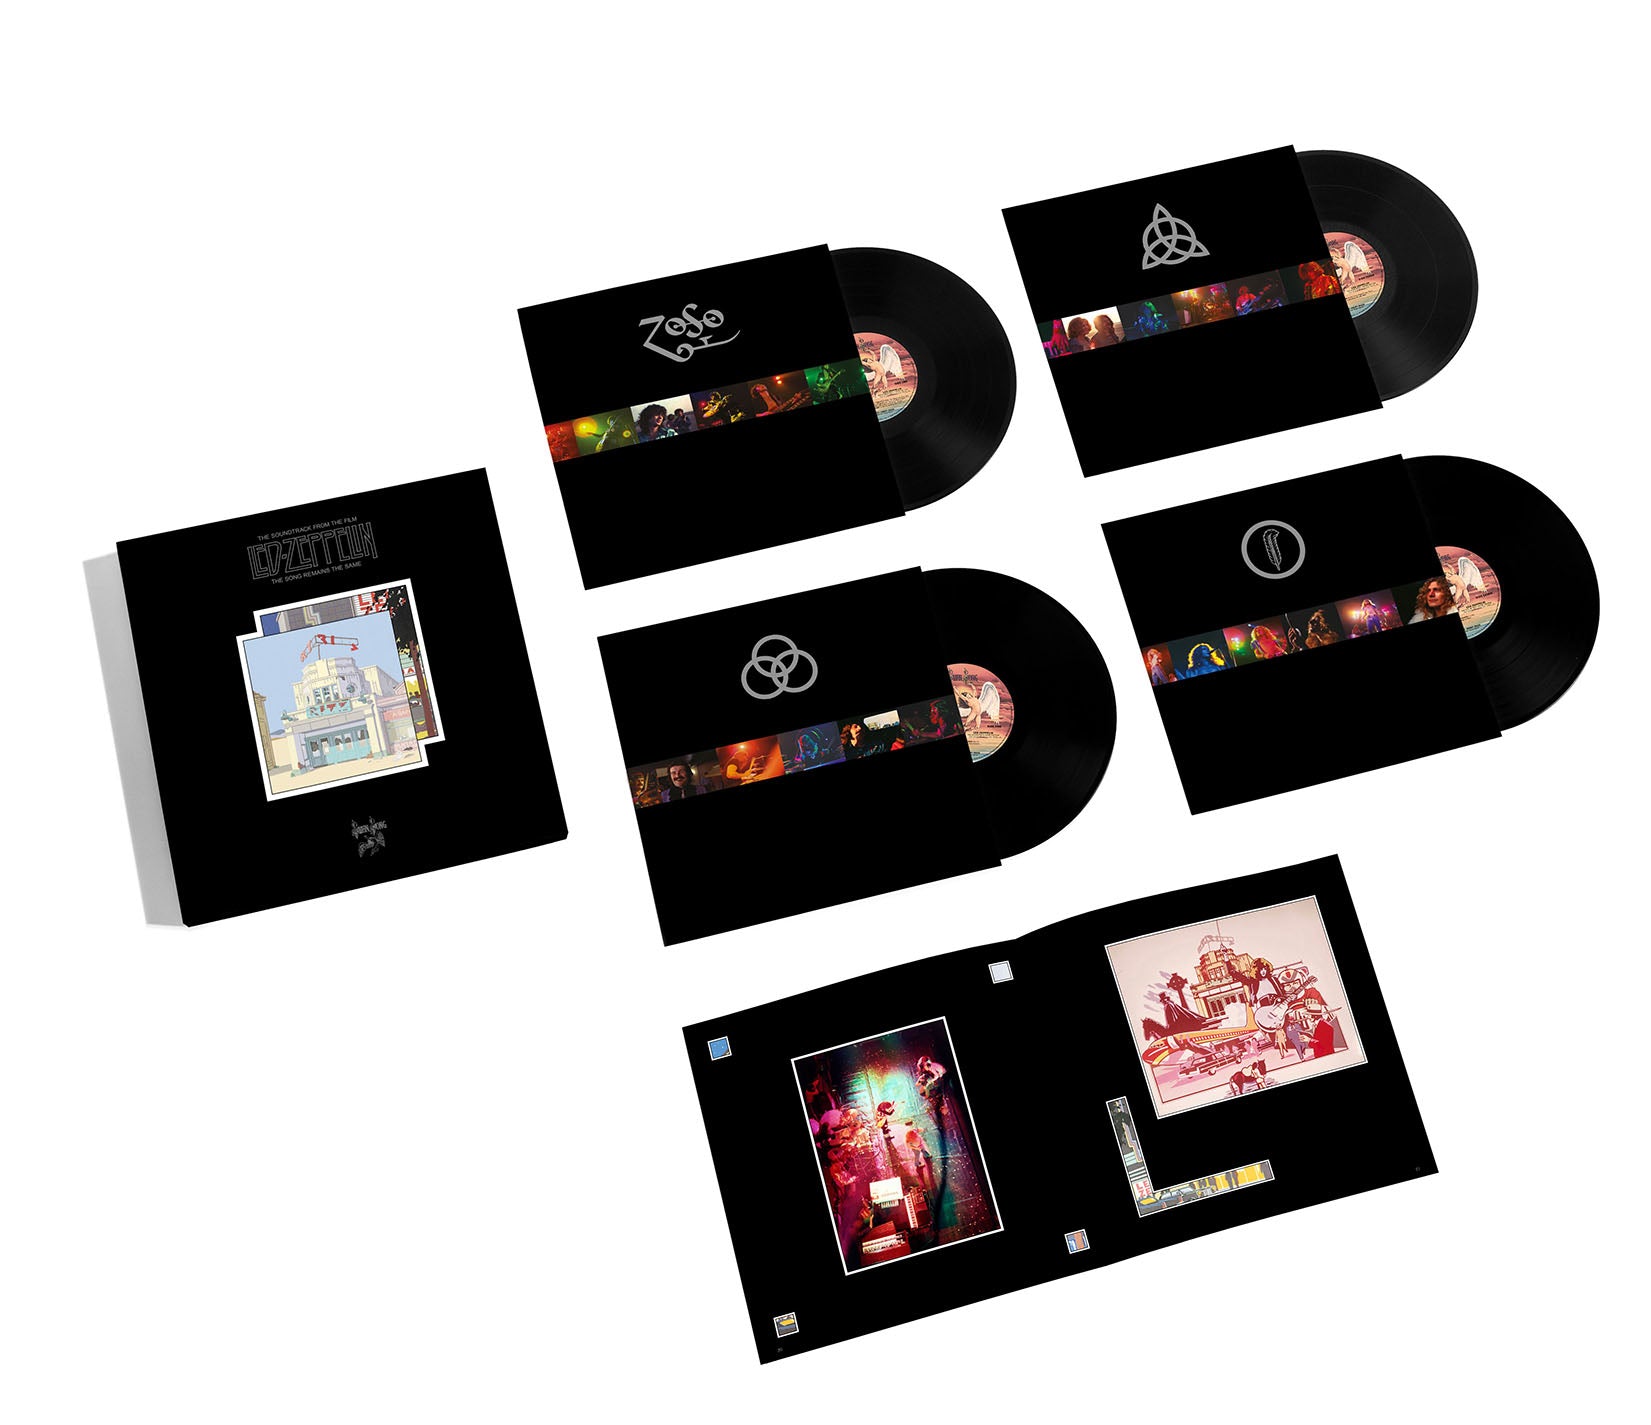 Led Zeppelin - The Soundtrack From The Film The Song Remains The Same [4LP Box Set]